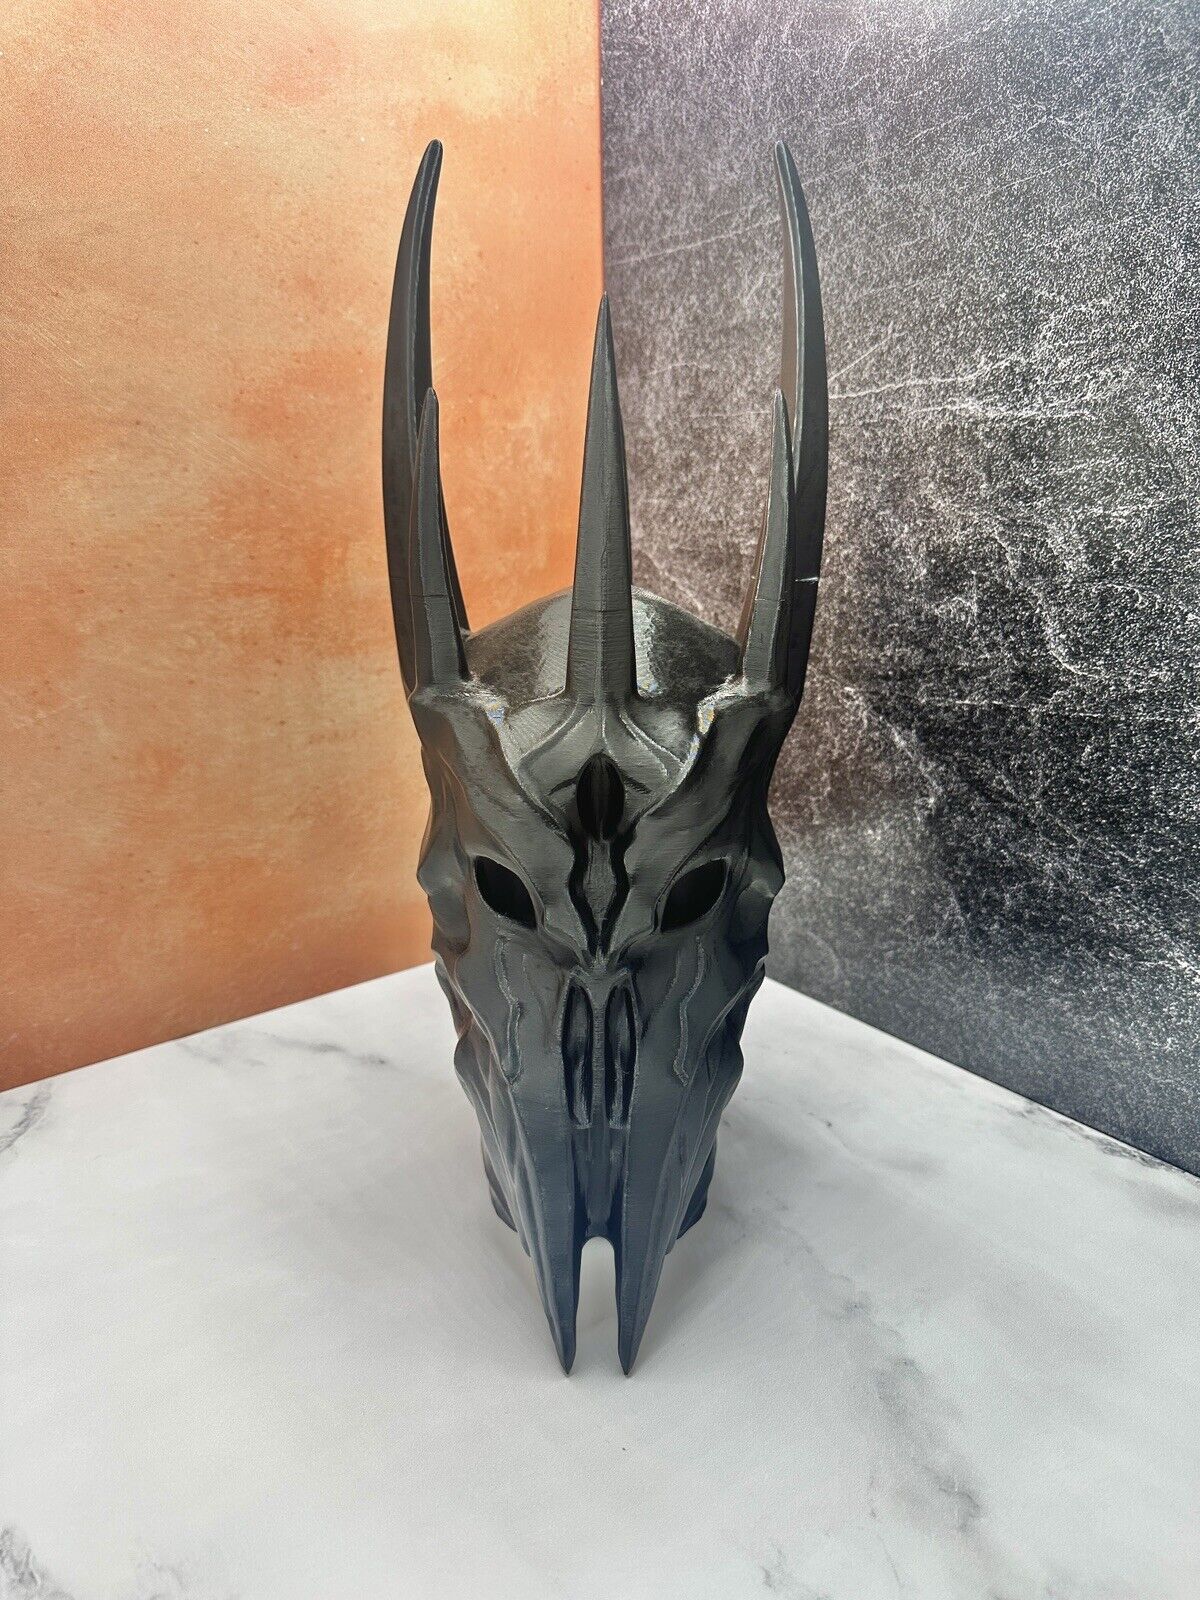 Sauron The Dark Lord of The Rings Helm Headphone Stand LOTR Decor Display